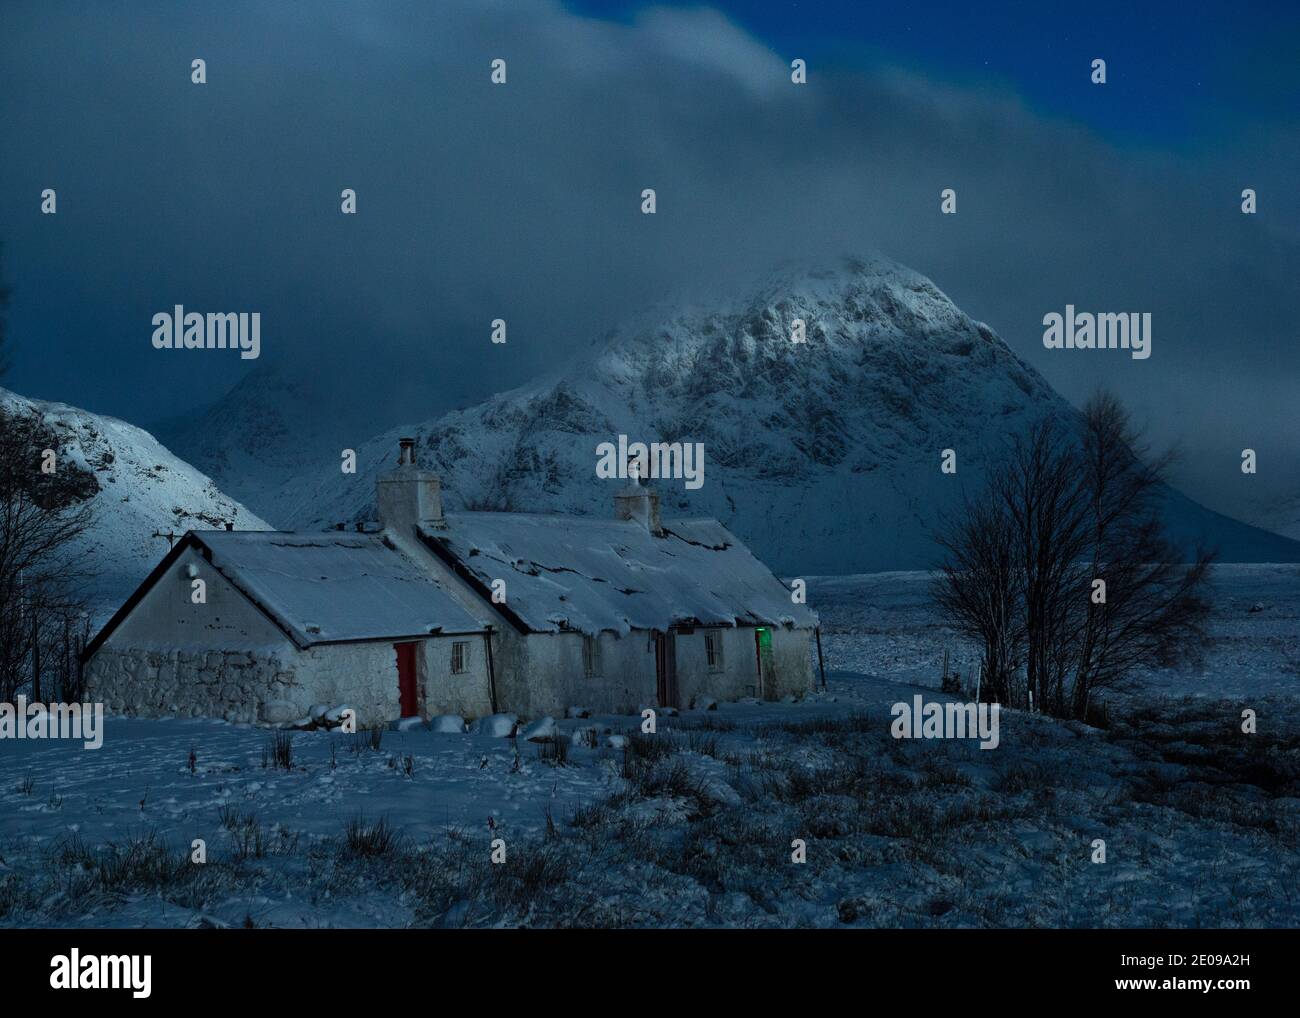 Glencoe, Scotland, UK. 30th Dec, 2020. Pictured: Highland cottage in Glencoe with the famous triangular mountain of Buachaille Etive Mòr in the background with its summit enshrouded in cloud and freezing mist. Yellow snow warning in place as more snow with freezing temperatures expected again overnight. Credit: Colin Fisher/Alamy Live News Stock Photo